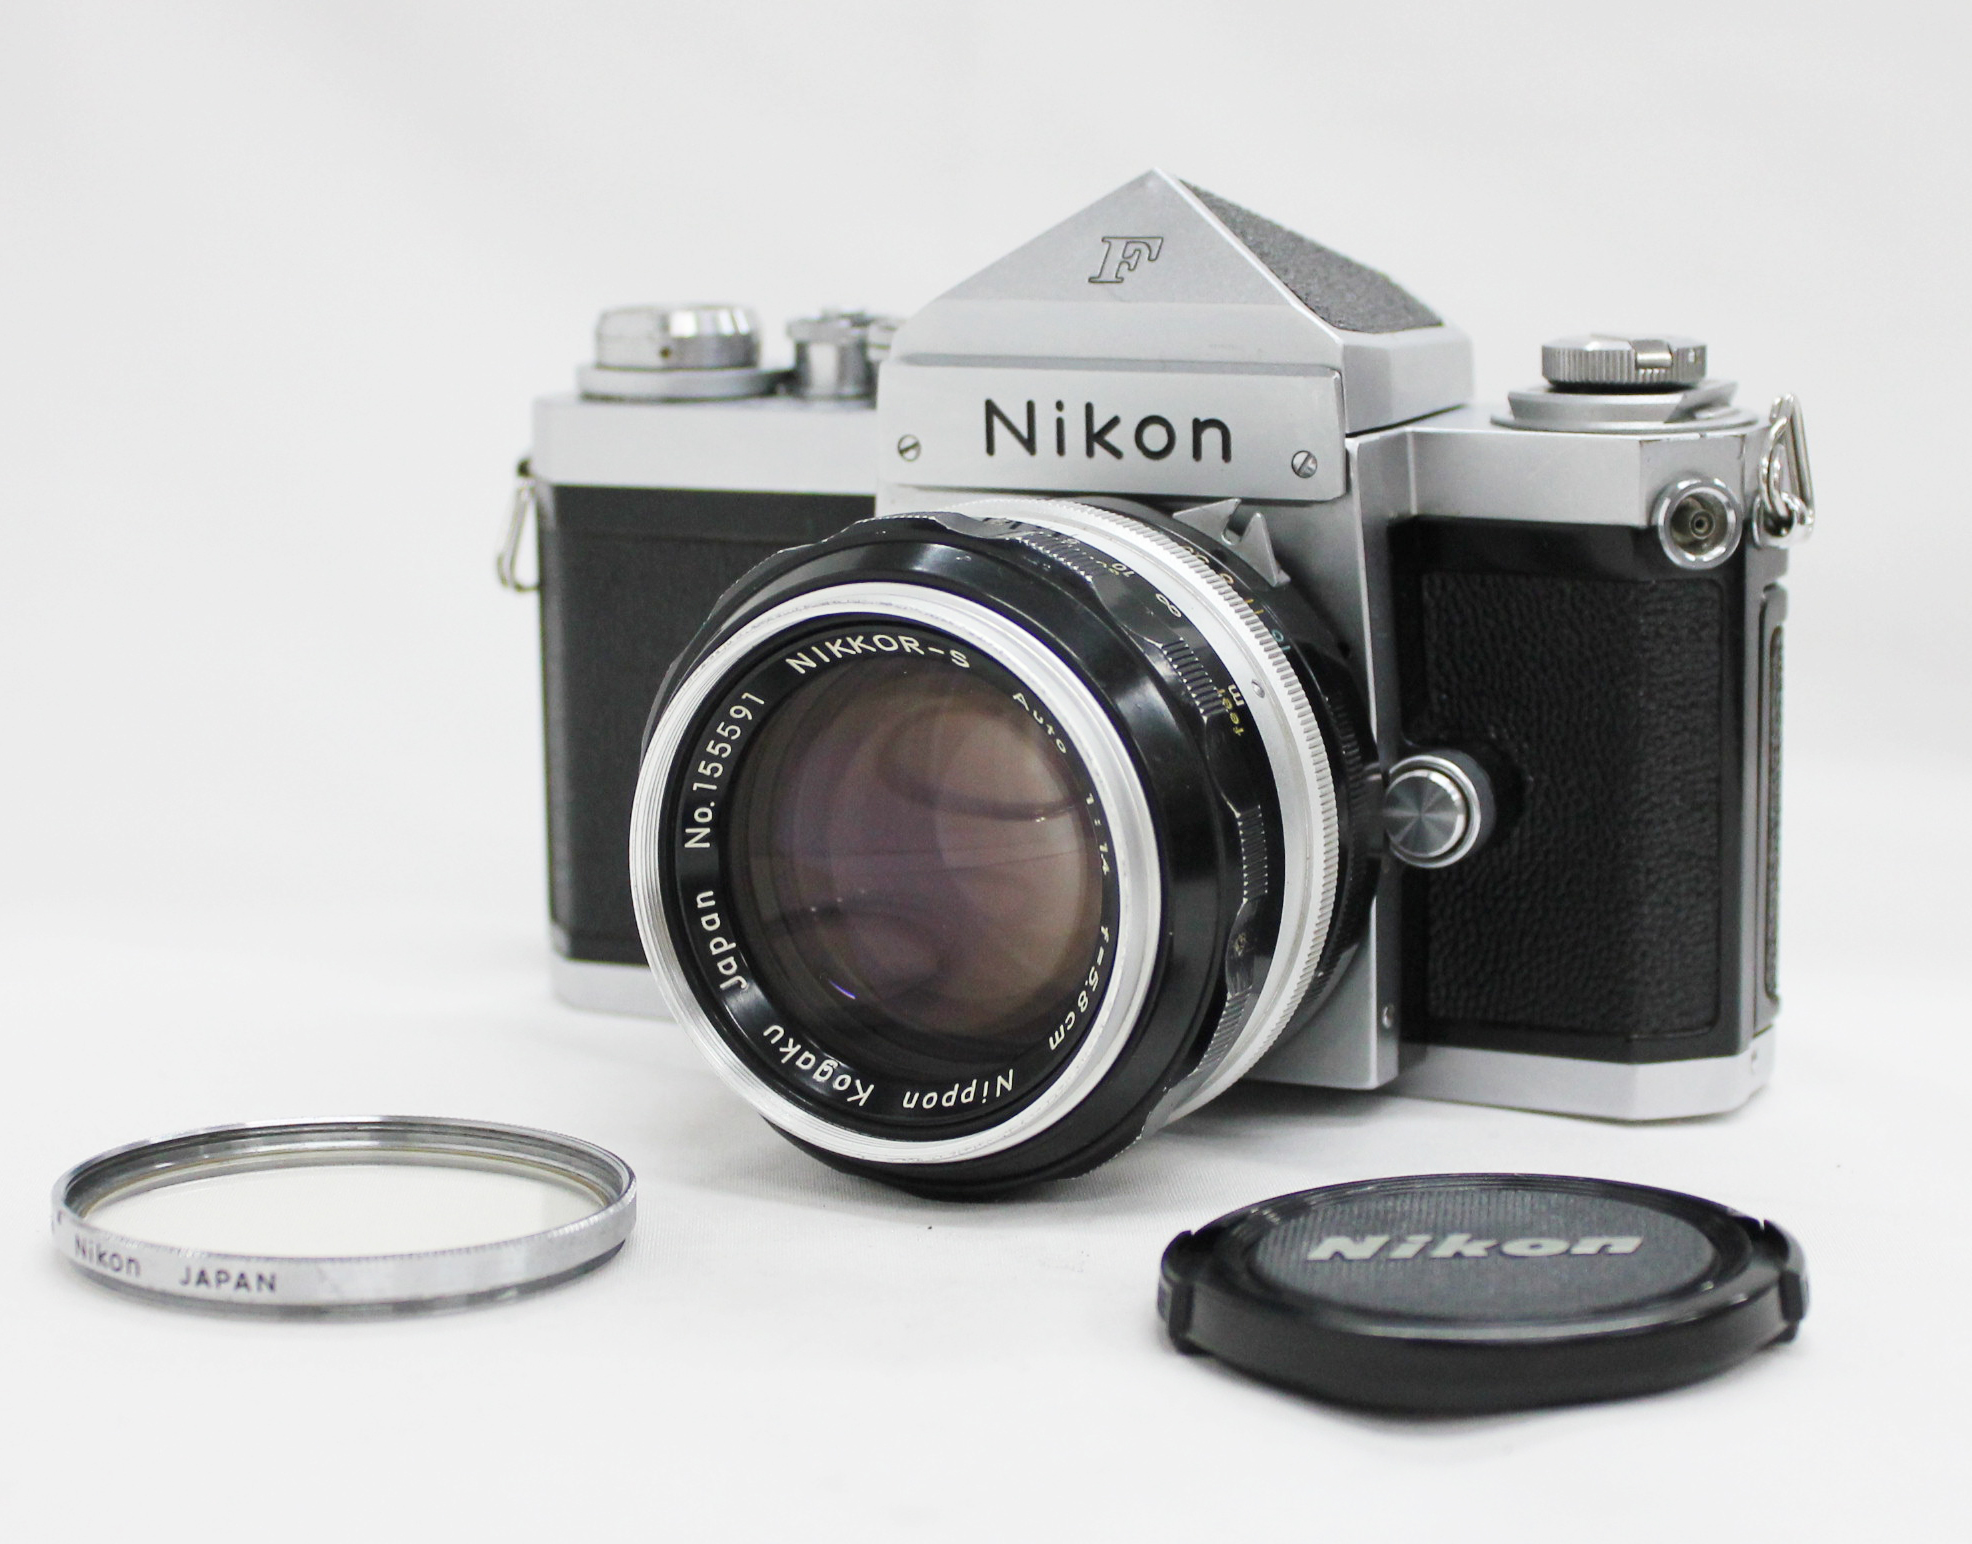 Japan Used Camera Shop | [Vintage] Nikon F Eye Level SLR Film Camera with Nikkor-S Auto 58mm F/1.4 SN 642xxxx from Japan